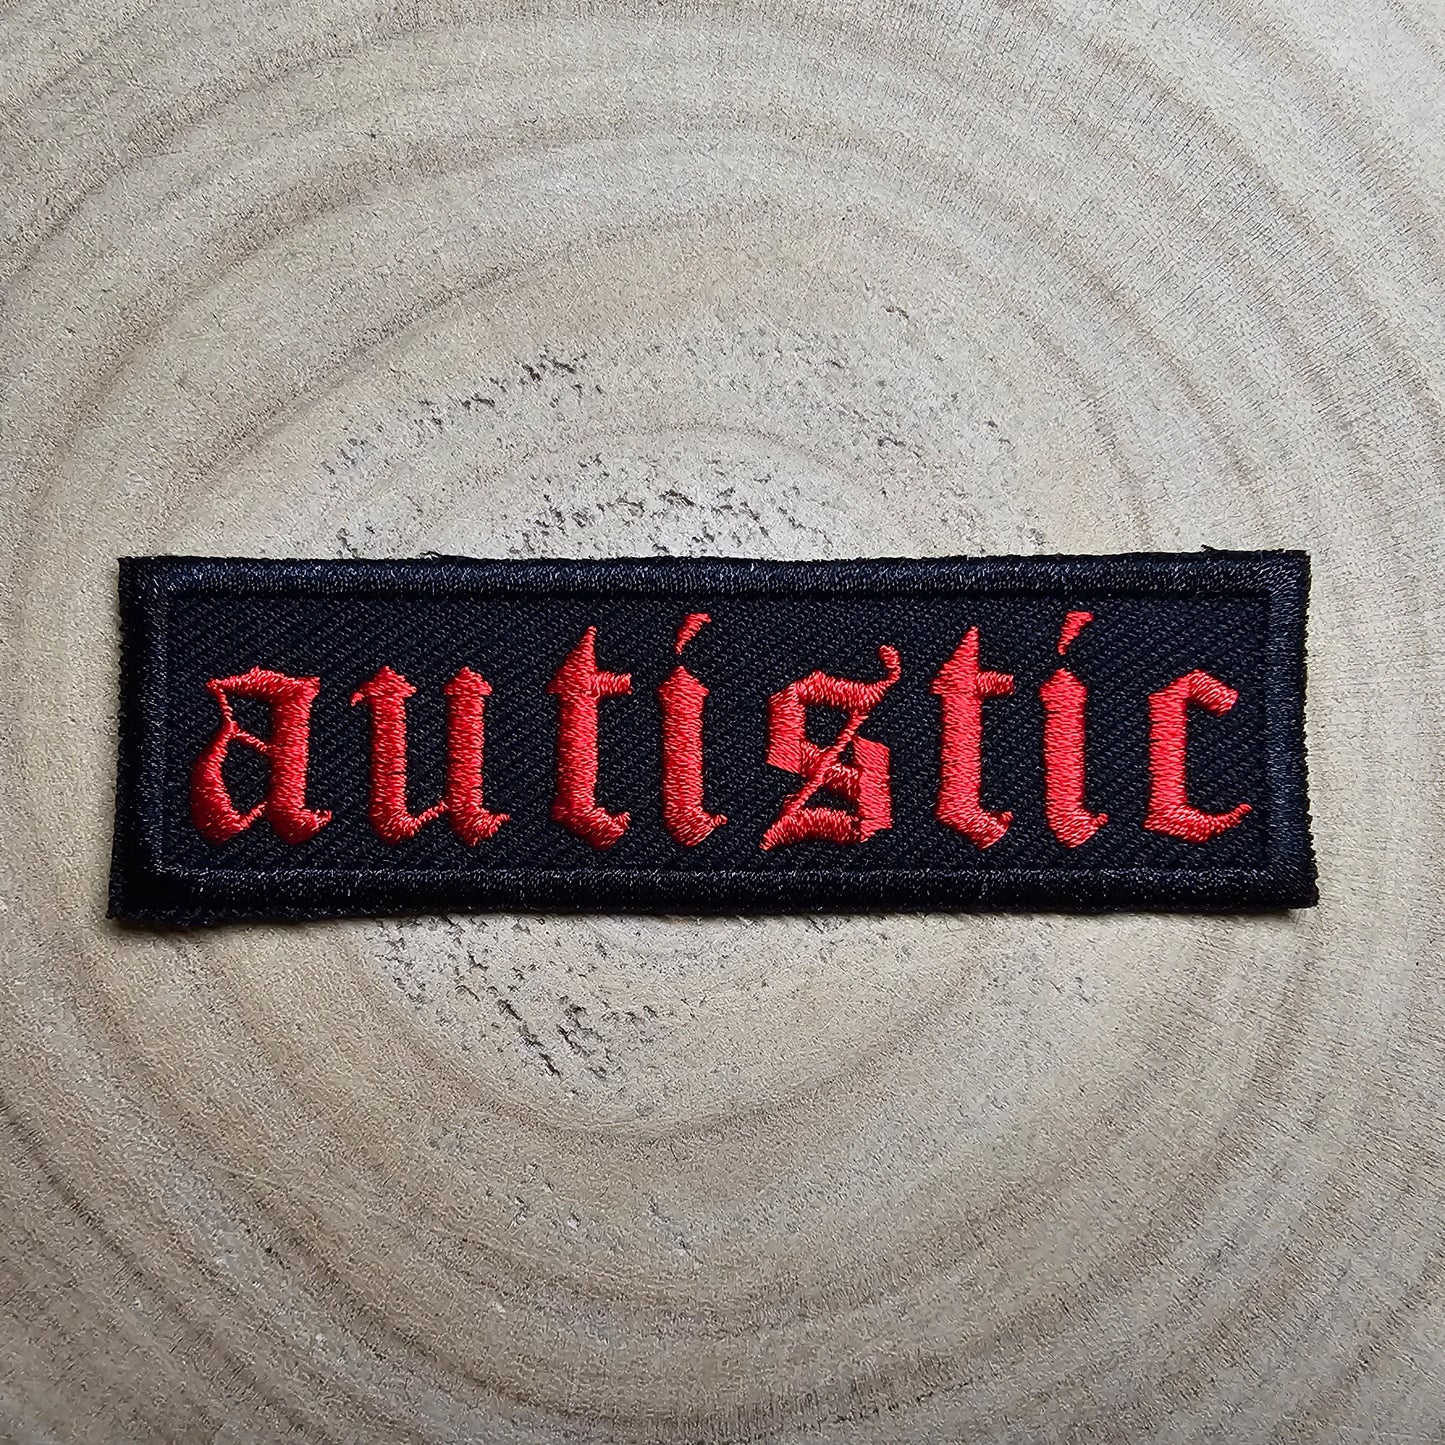 Autistic Old English Tattoo Metal Style Iron On Embroidered Patch Neurodiversity